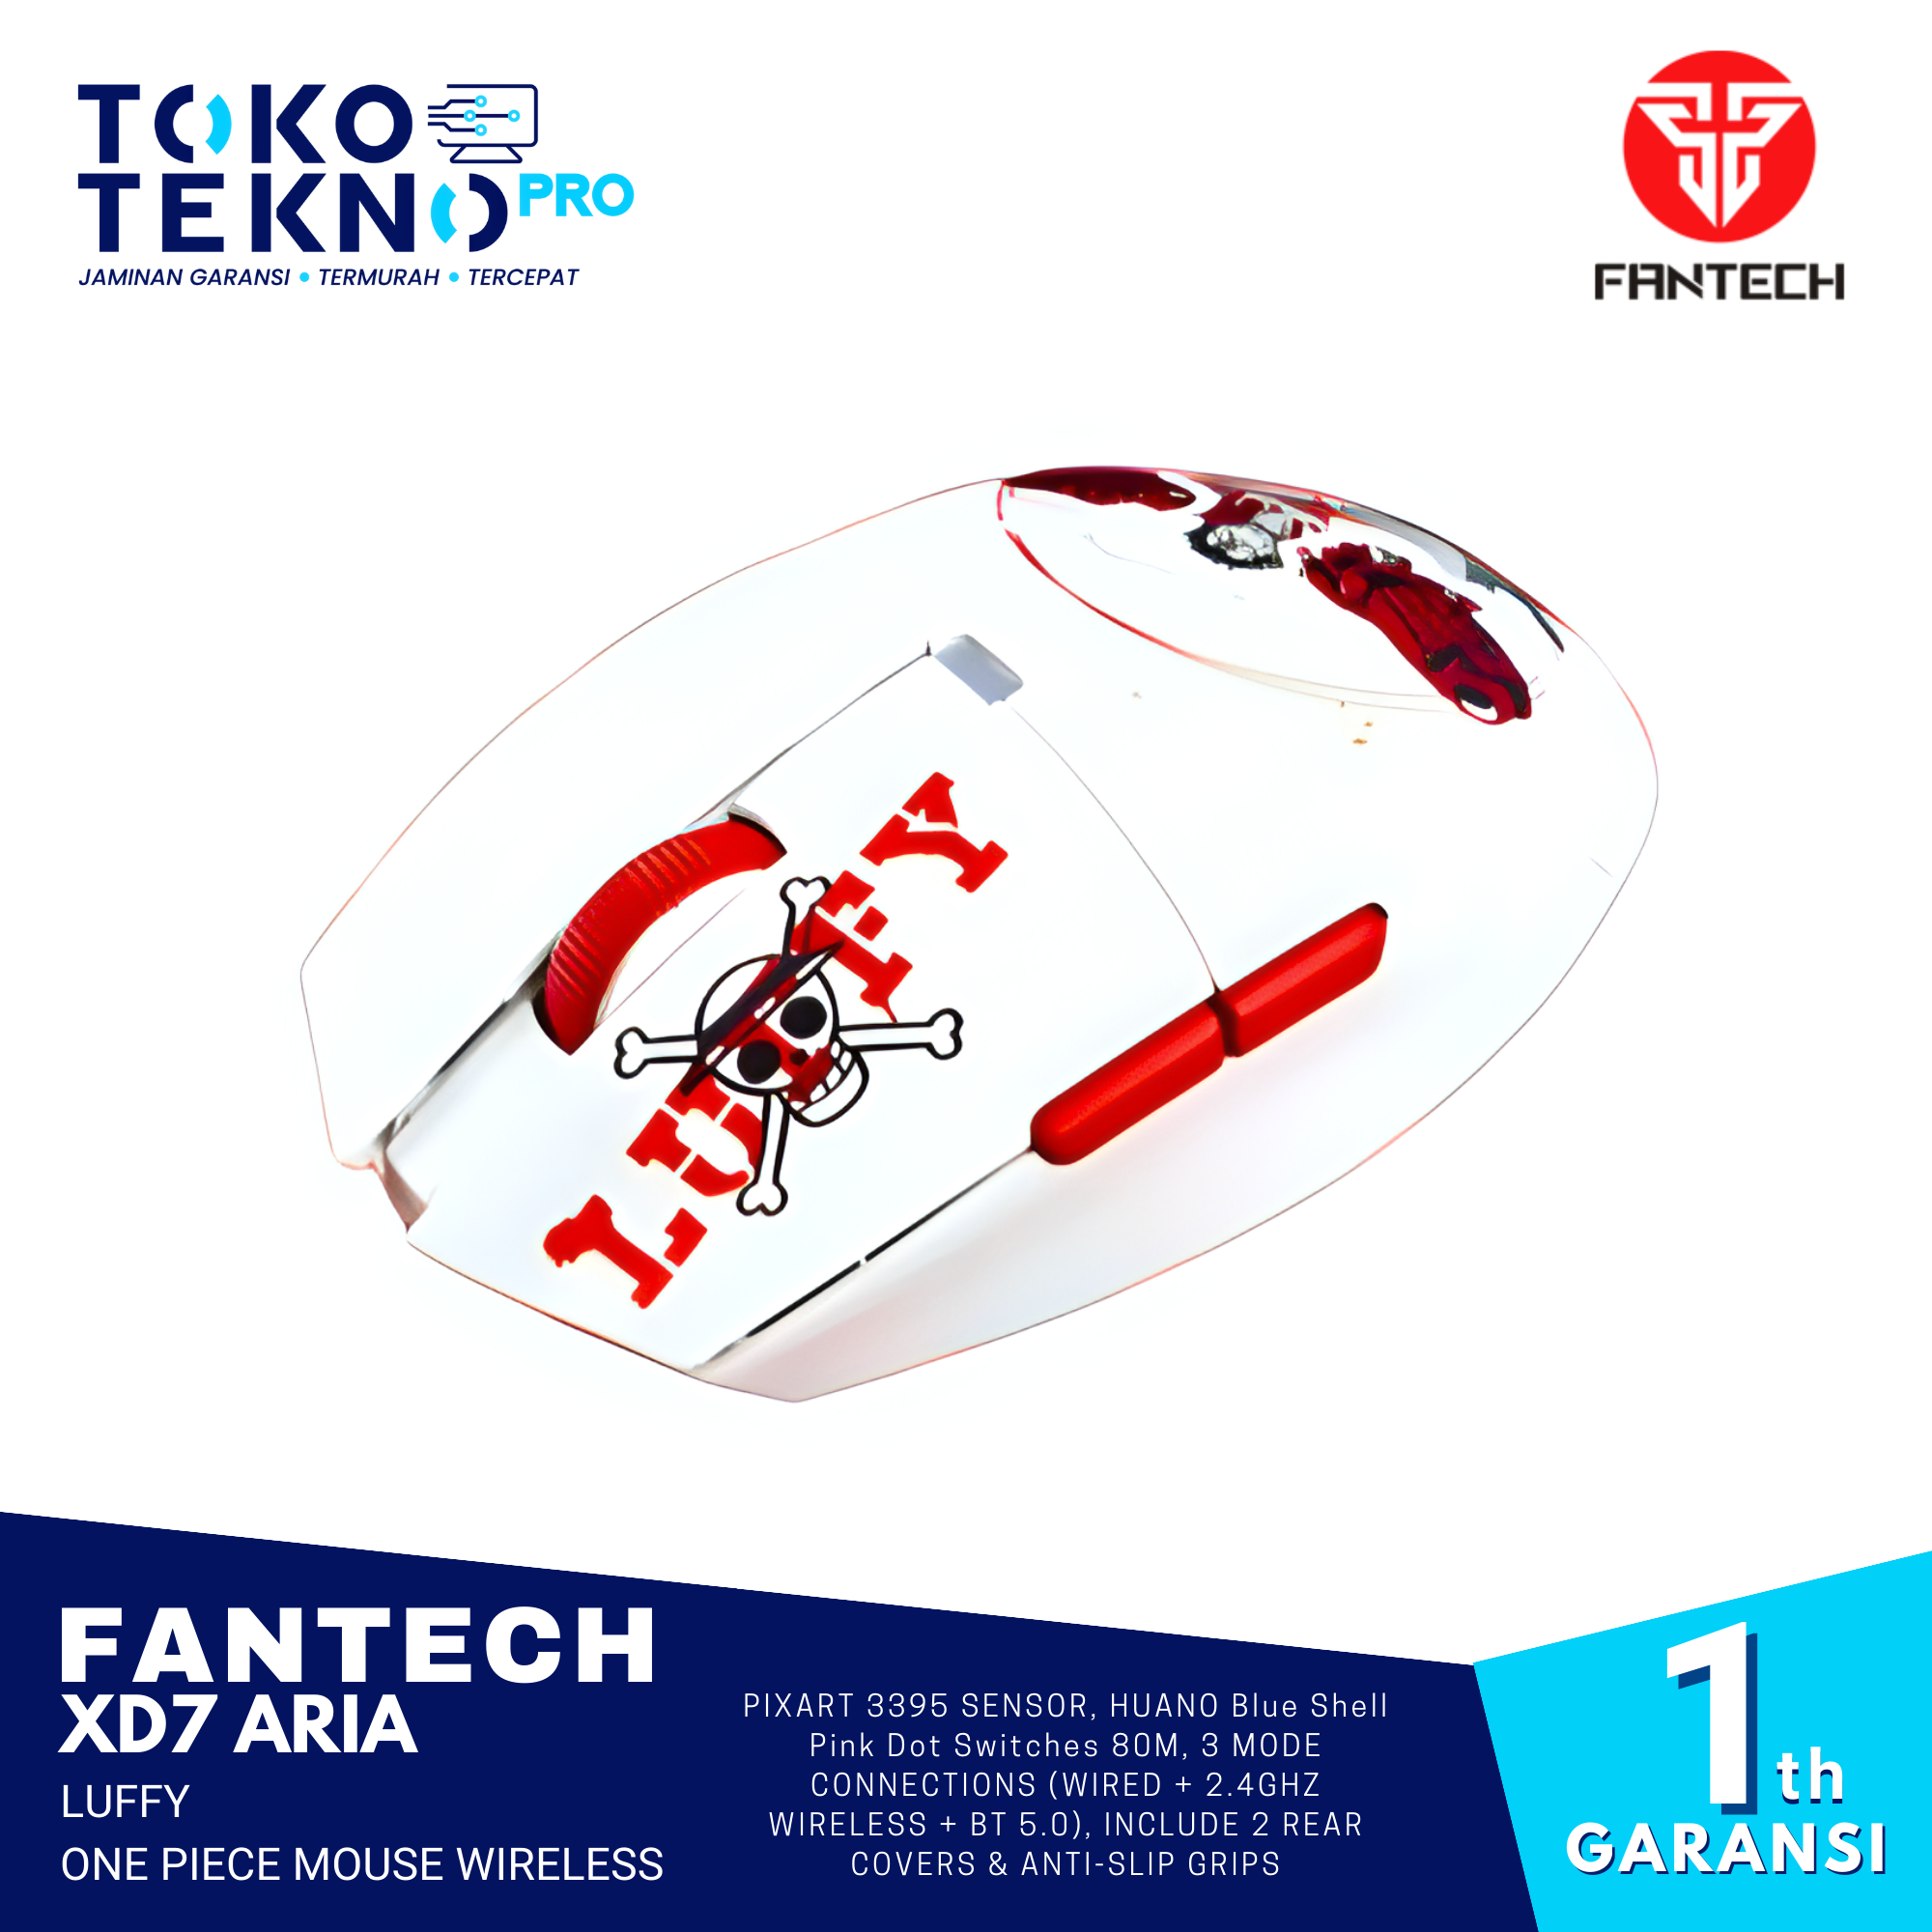 Fantech XD7 Aria Luffy One Piece Mouse Wireless Gaming